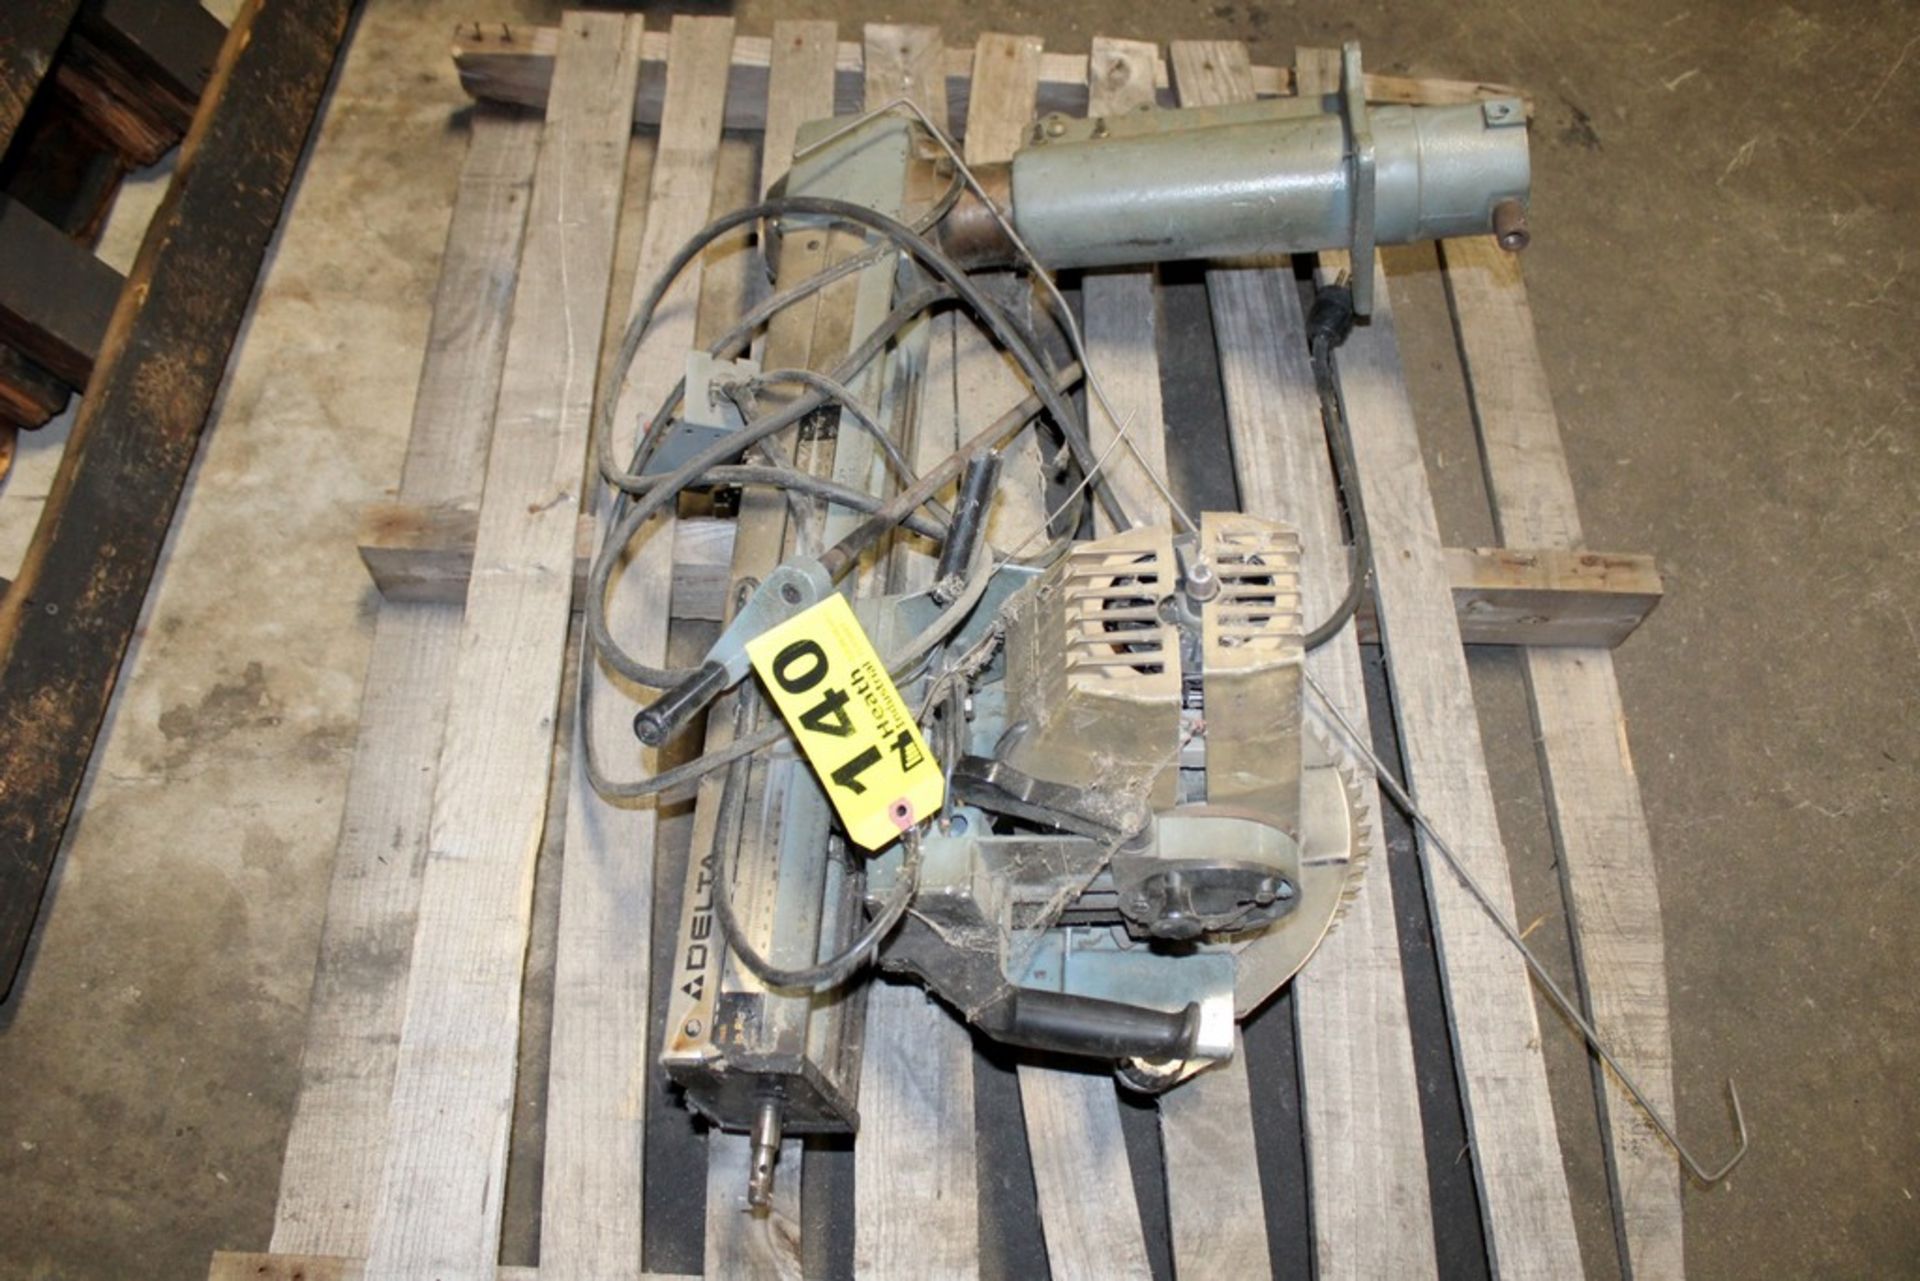 Delta 10" Radial Arm Saw Head - No Table - As Is - Image 2 of 2